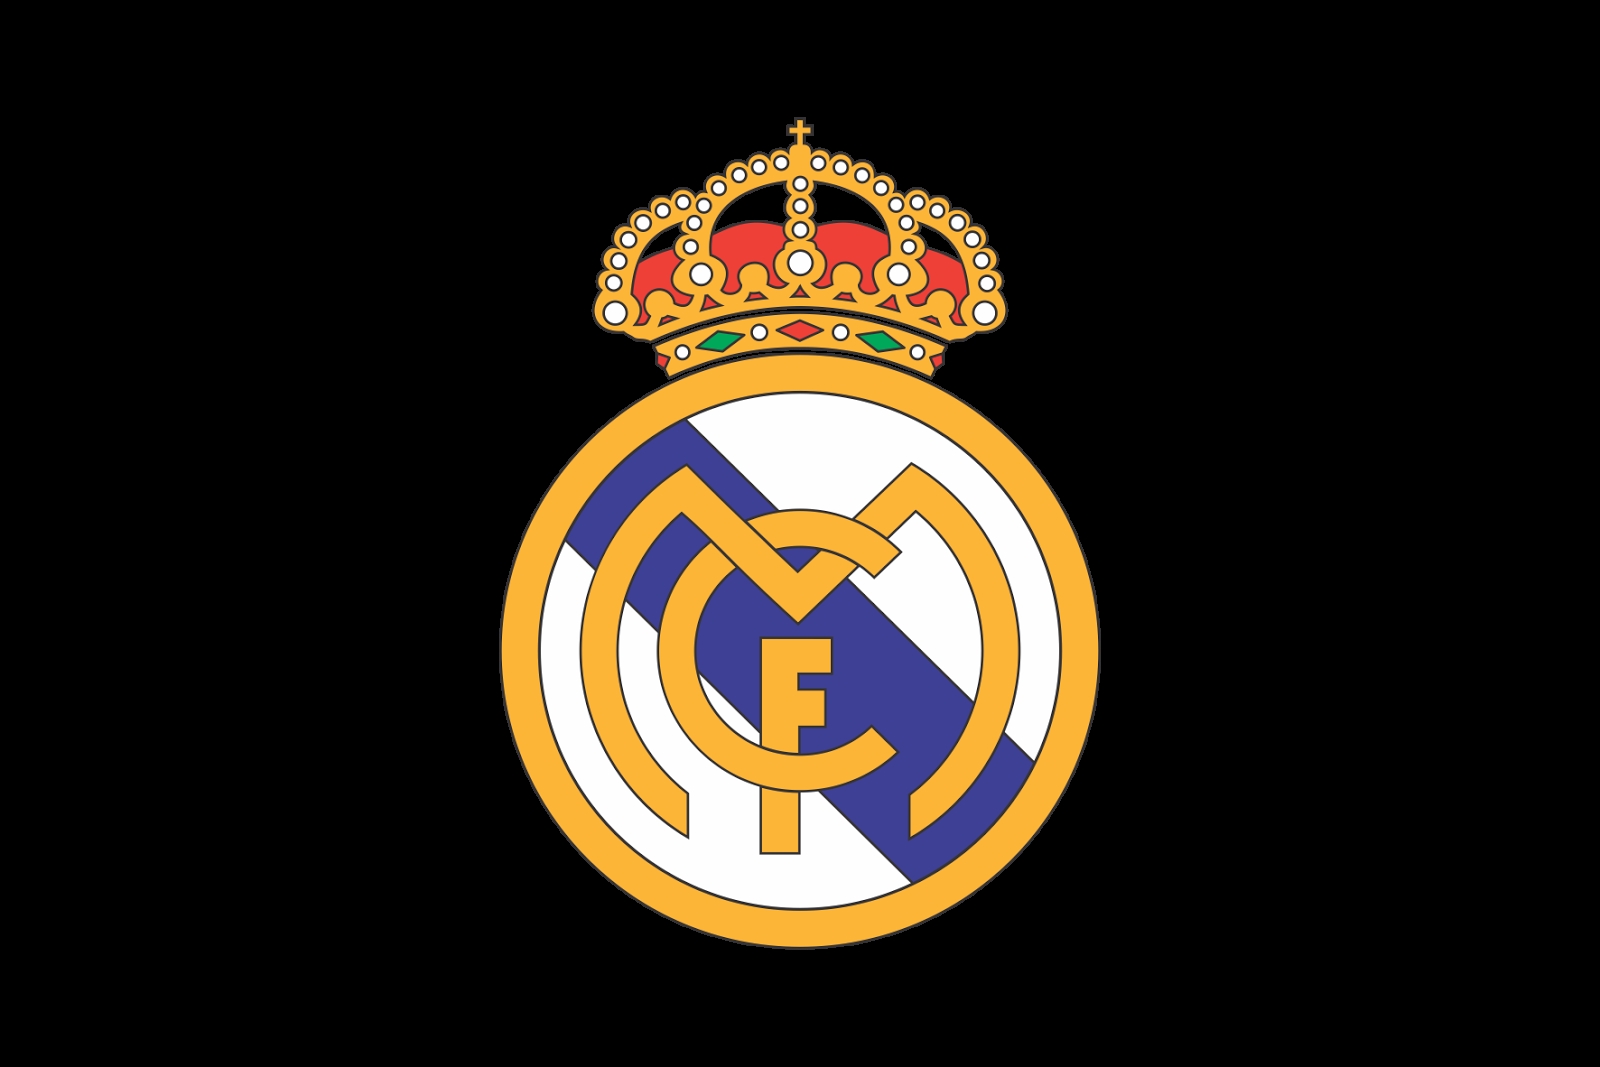 Real Madrid Logo Images Download - Real Madrid - 1600x1067 Wallpaper -  